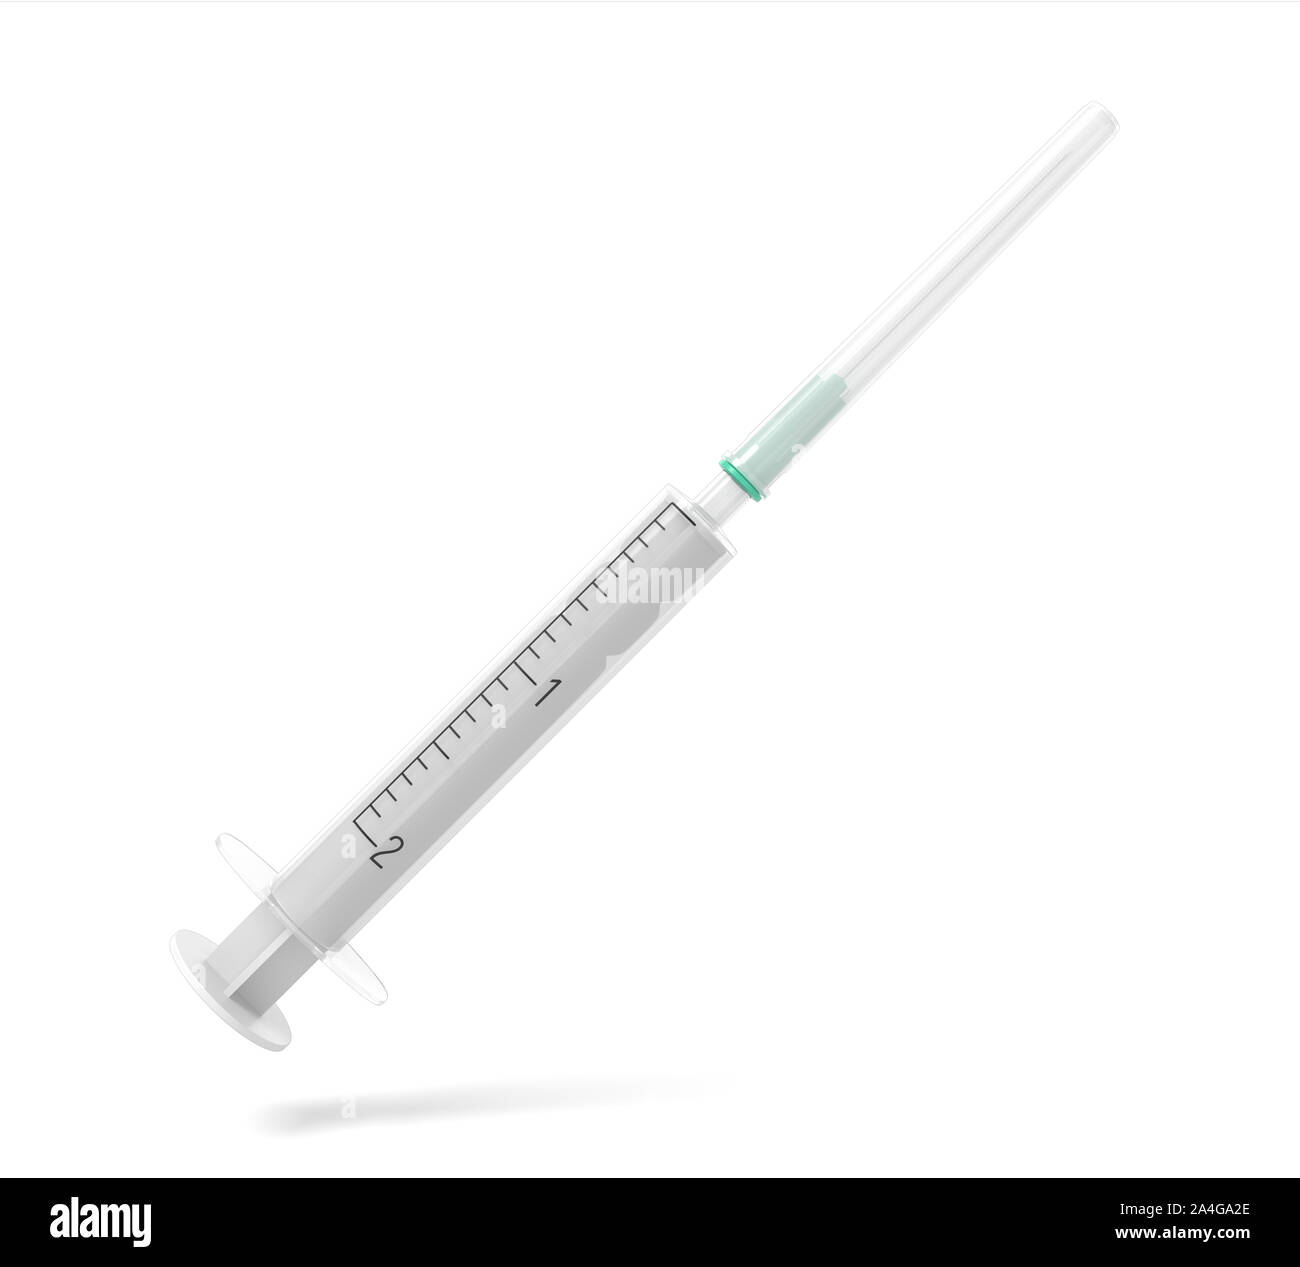 3d rendering of safety medical syringe with needle isolated on white background. Medicine and health. Healthcare industry. Medical instruments and equ Stock Photo